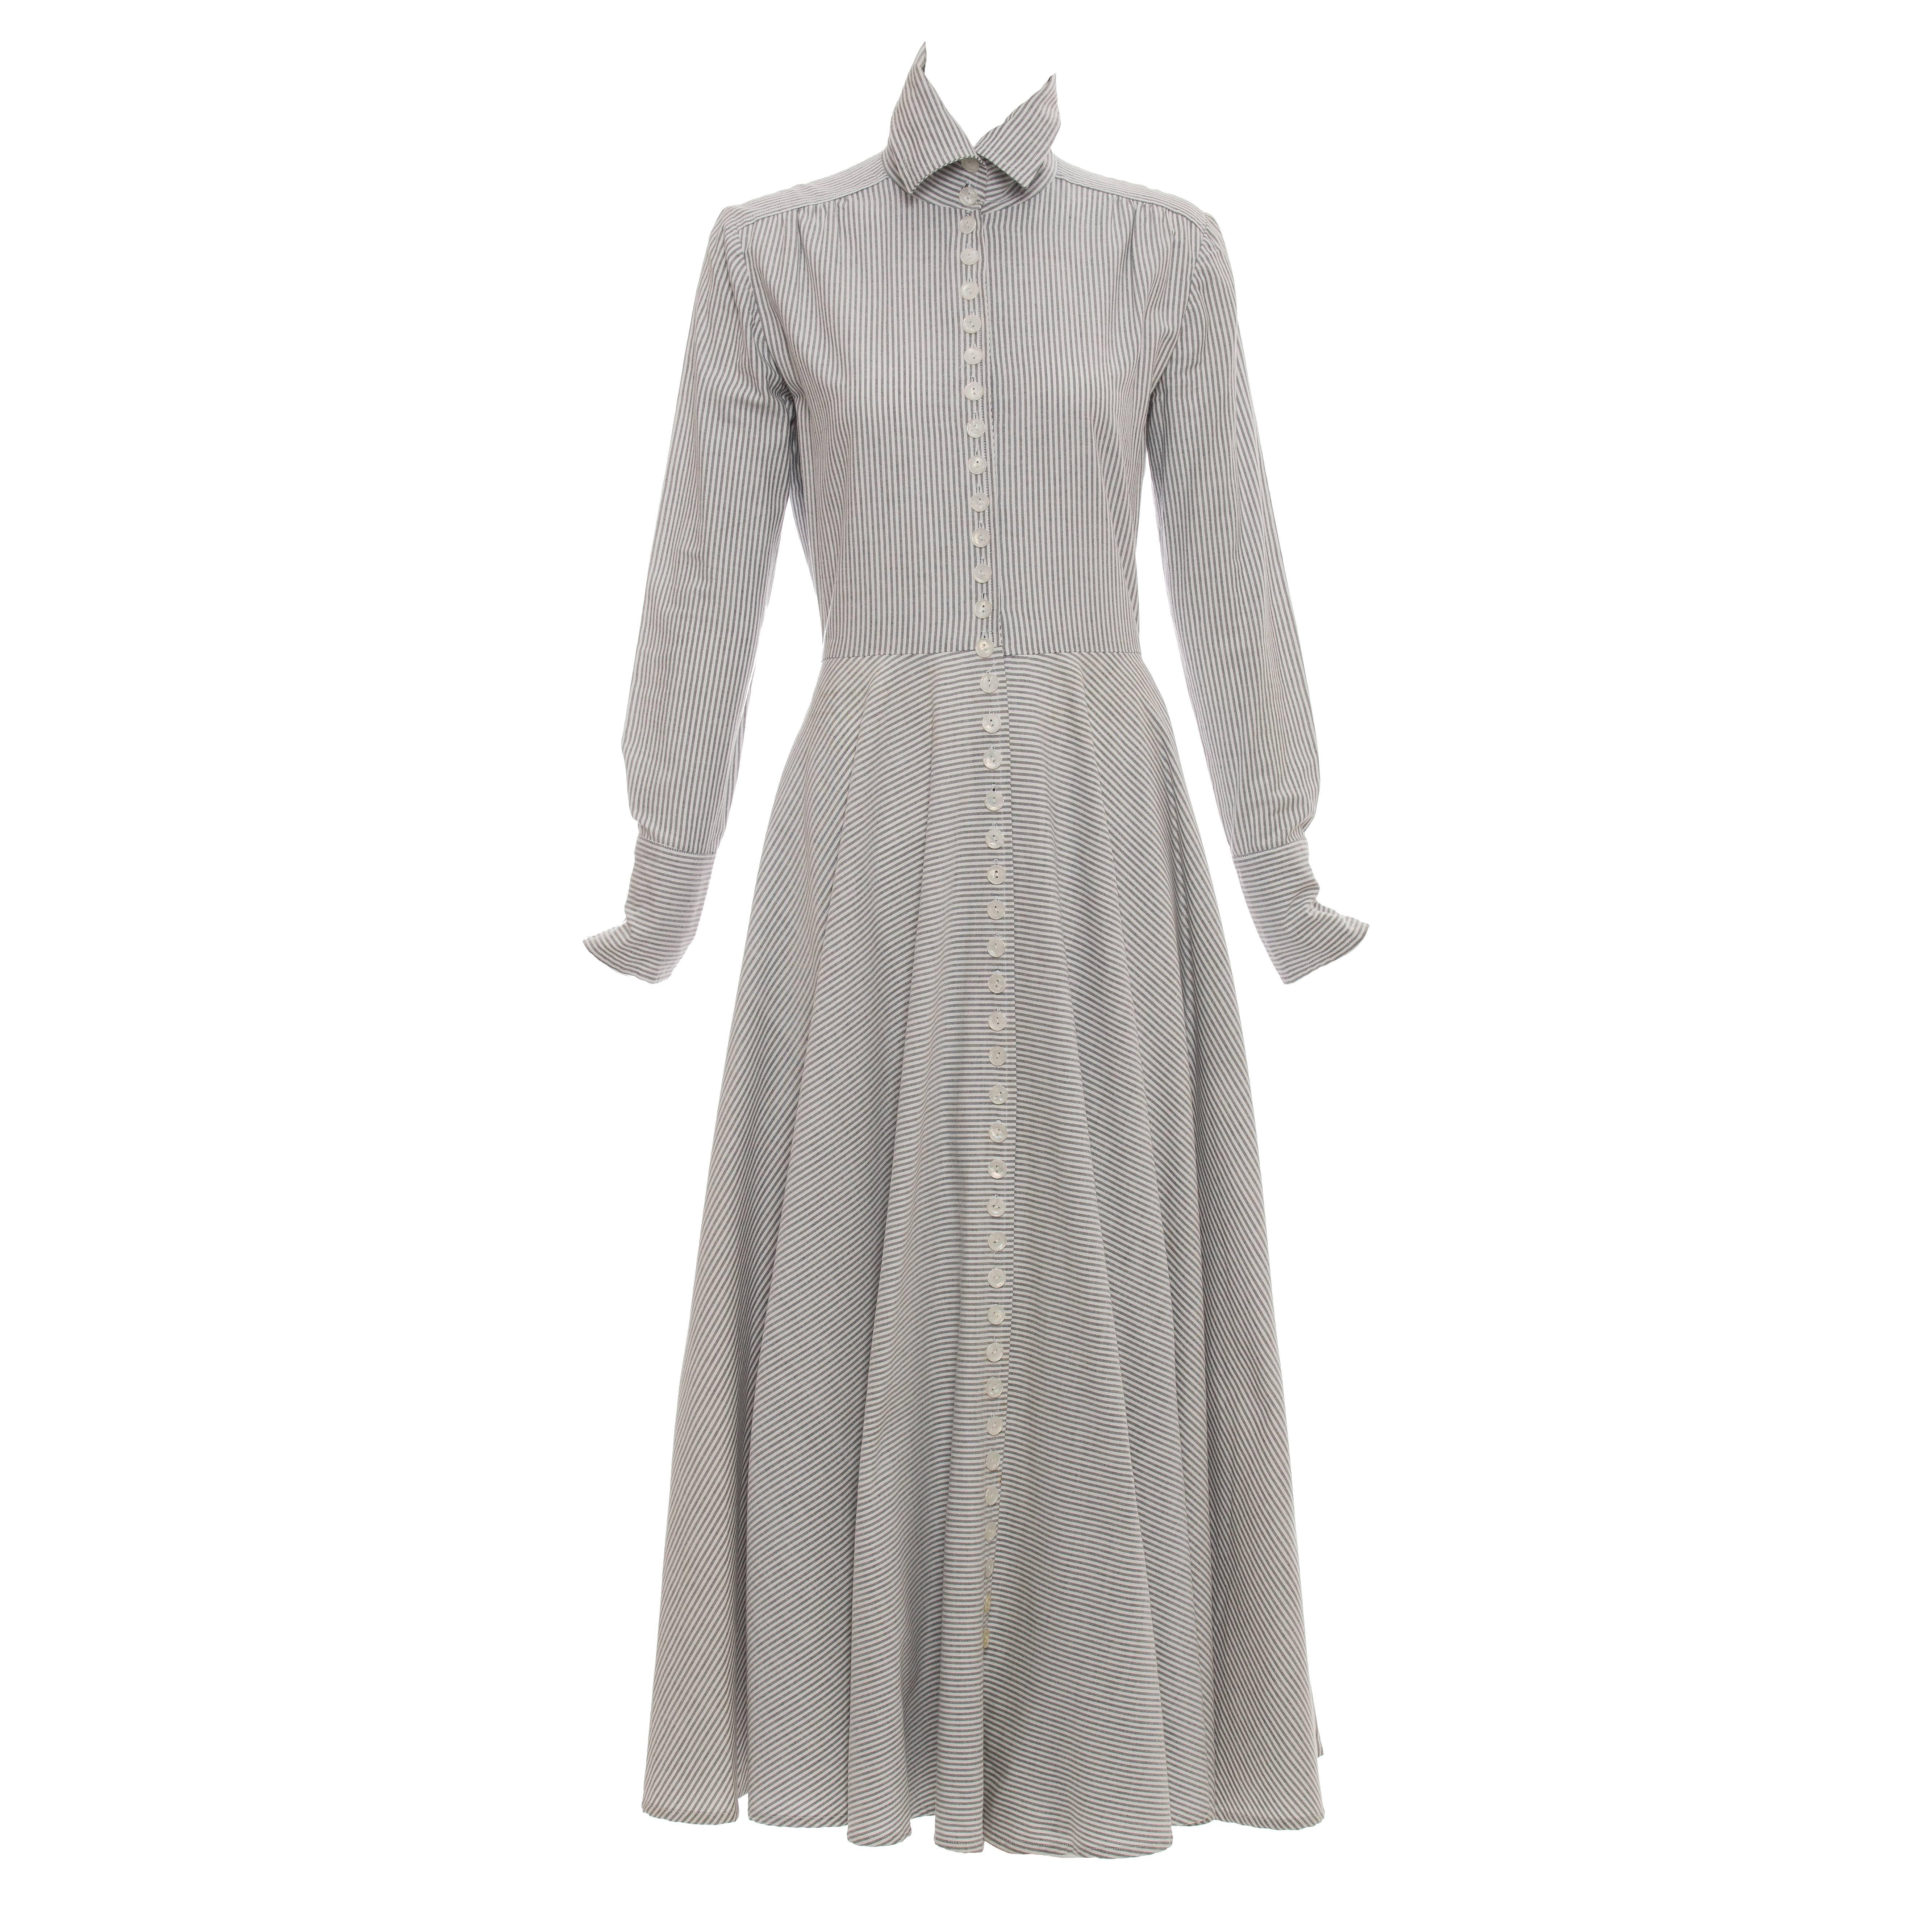 Norma Kamali Mother Of Pearl Button Front Cotton Dress, Circa 1980s